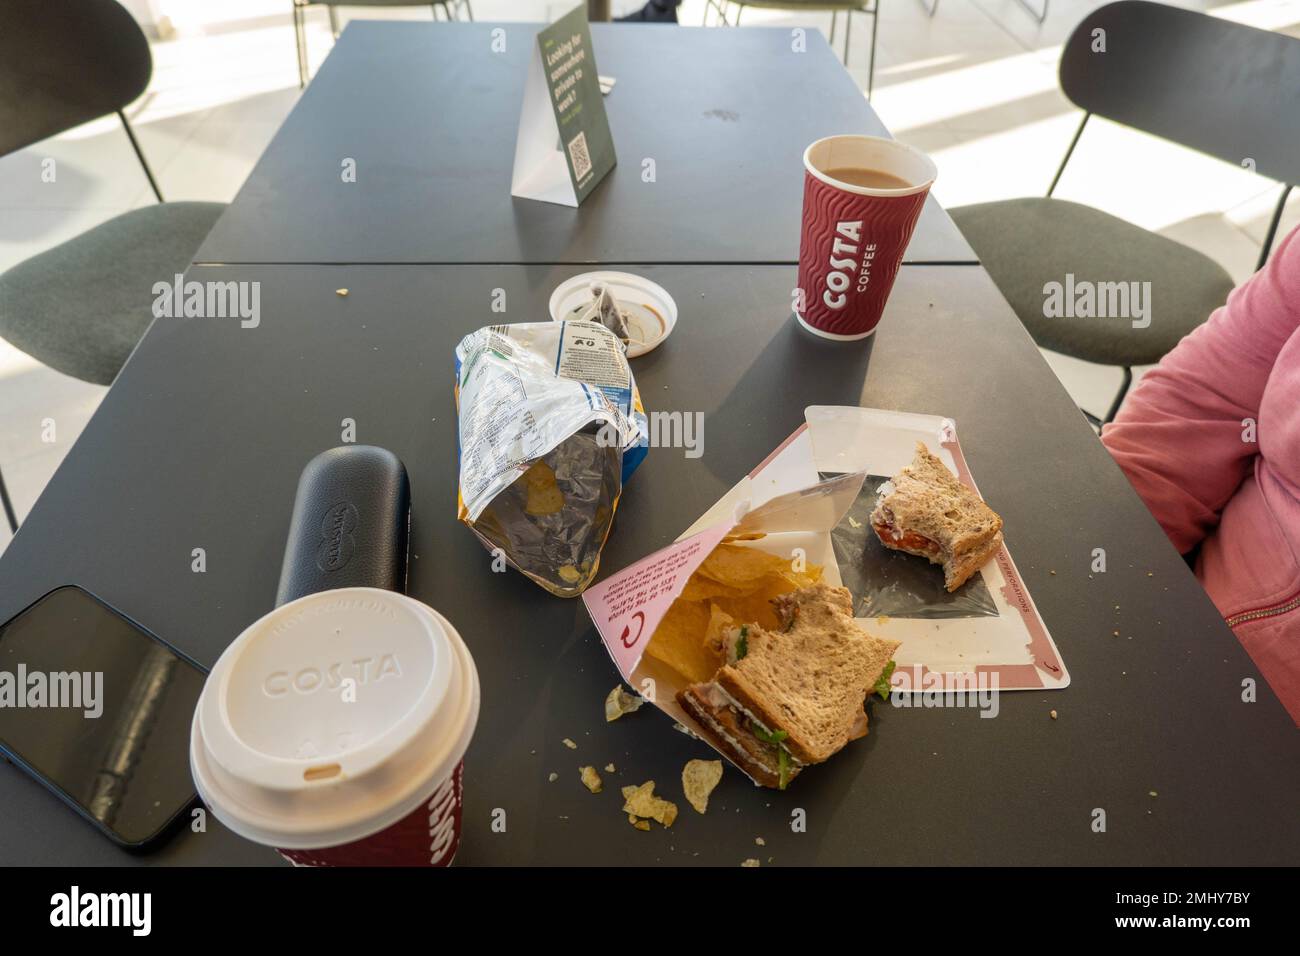 Table at a Costa coffee shop with half eaten sandwich, empty crisp packet   and cup of coffee Stock Photo